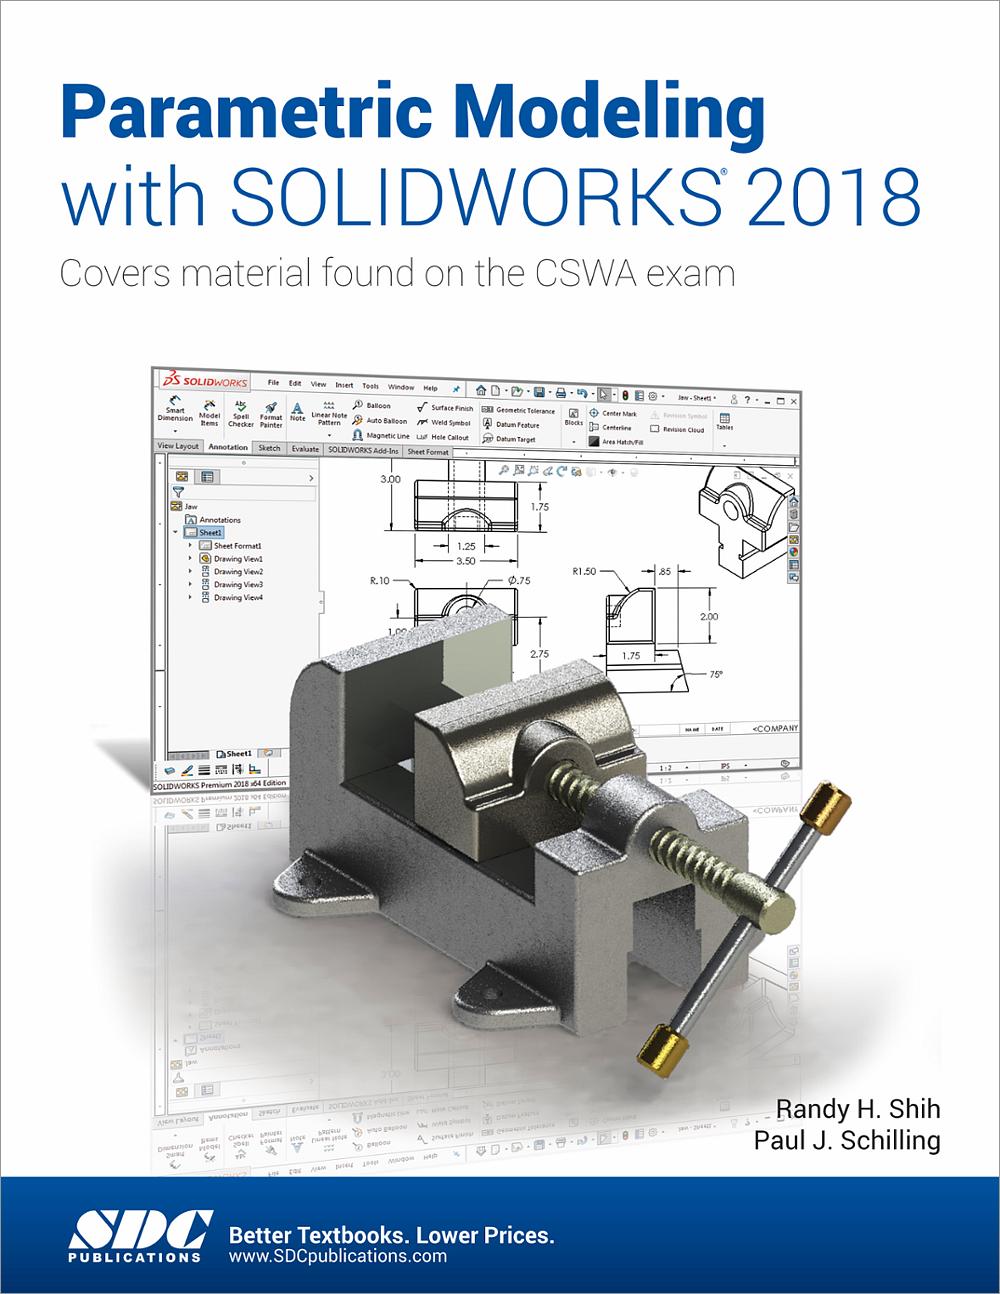 parametric modeling with solidworks 2017 pdf download